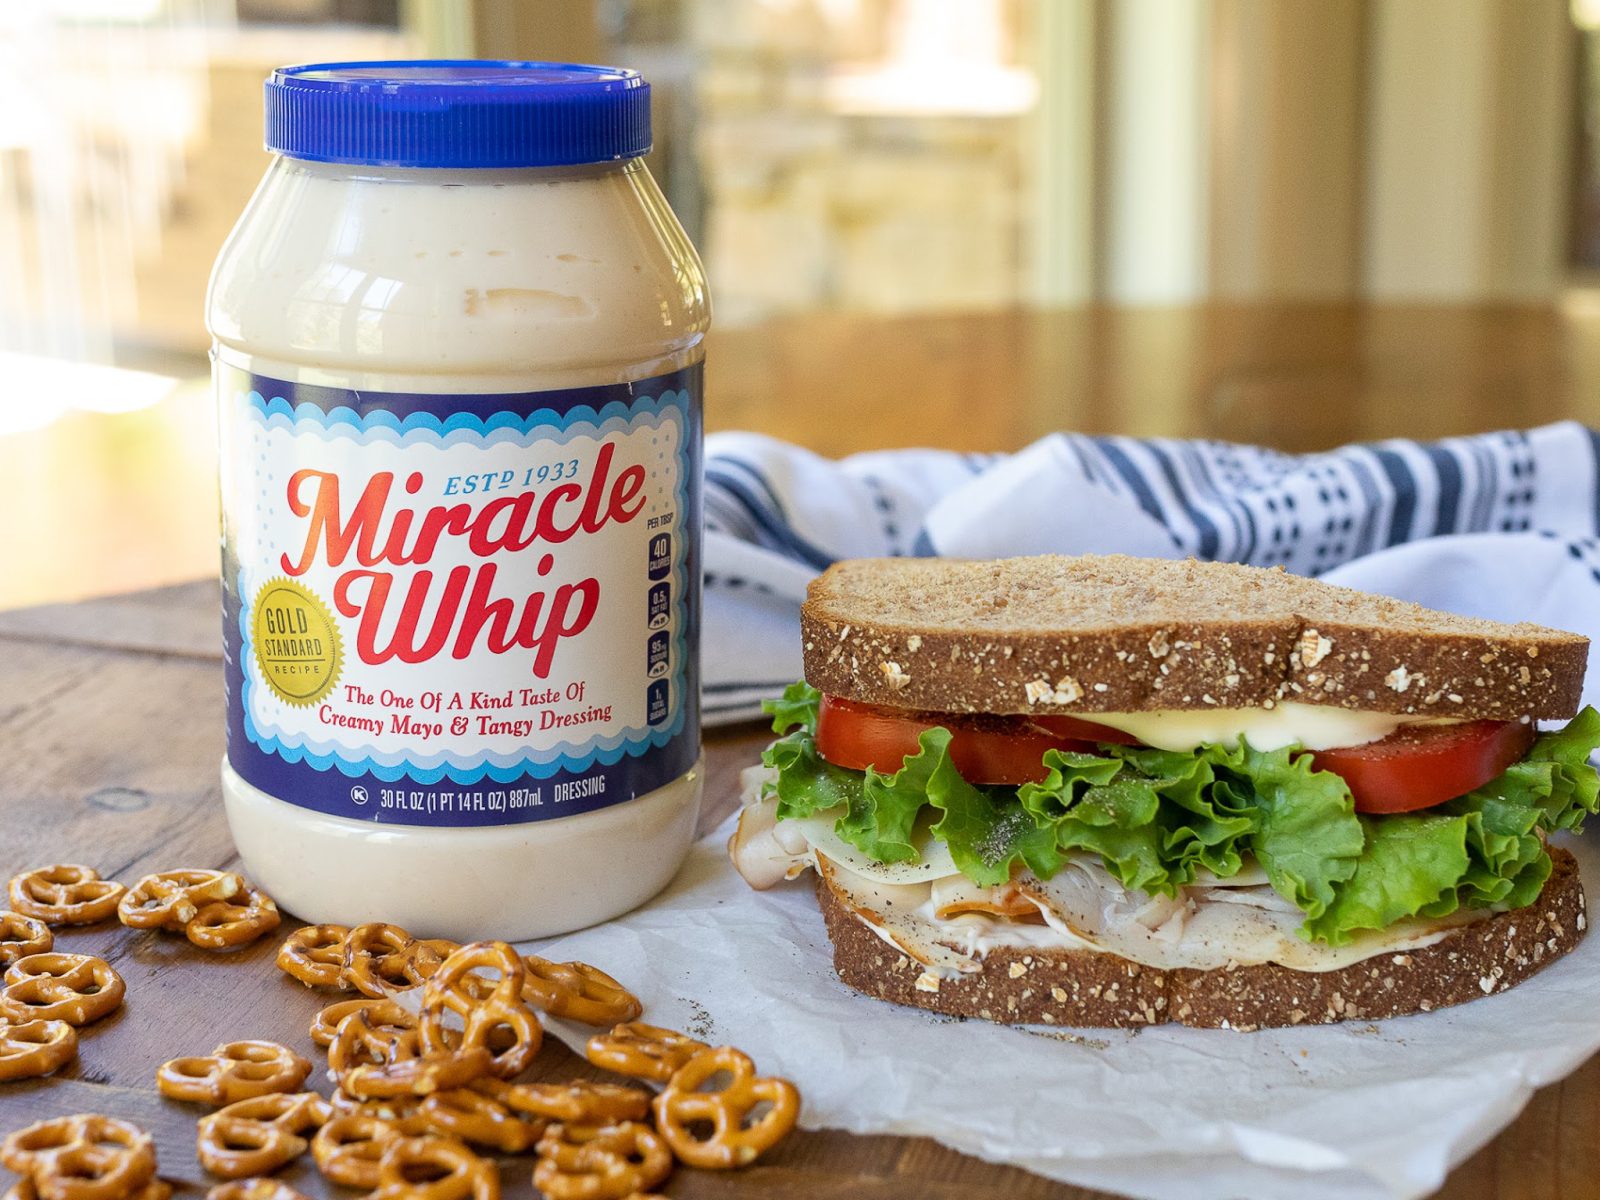 Miracle Whip As Low As $2.99 At Kroger